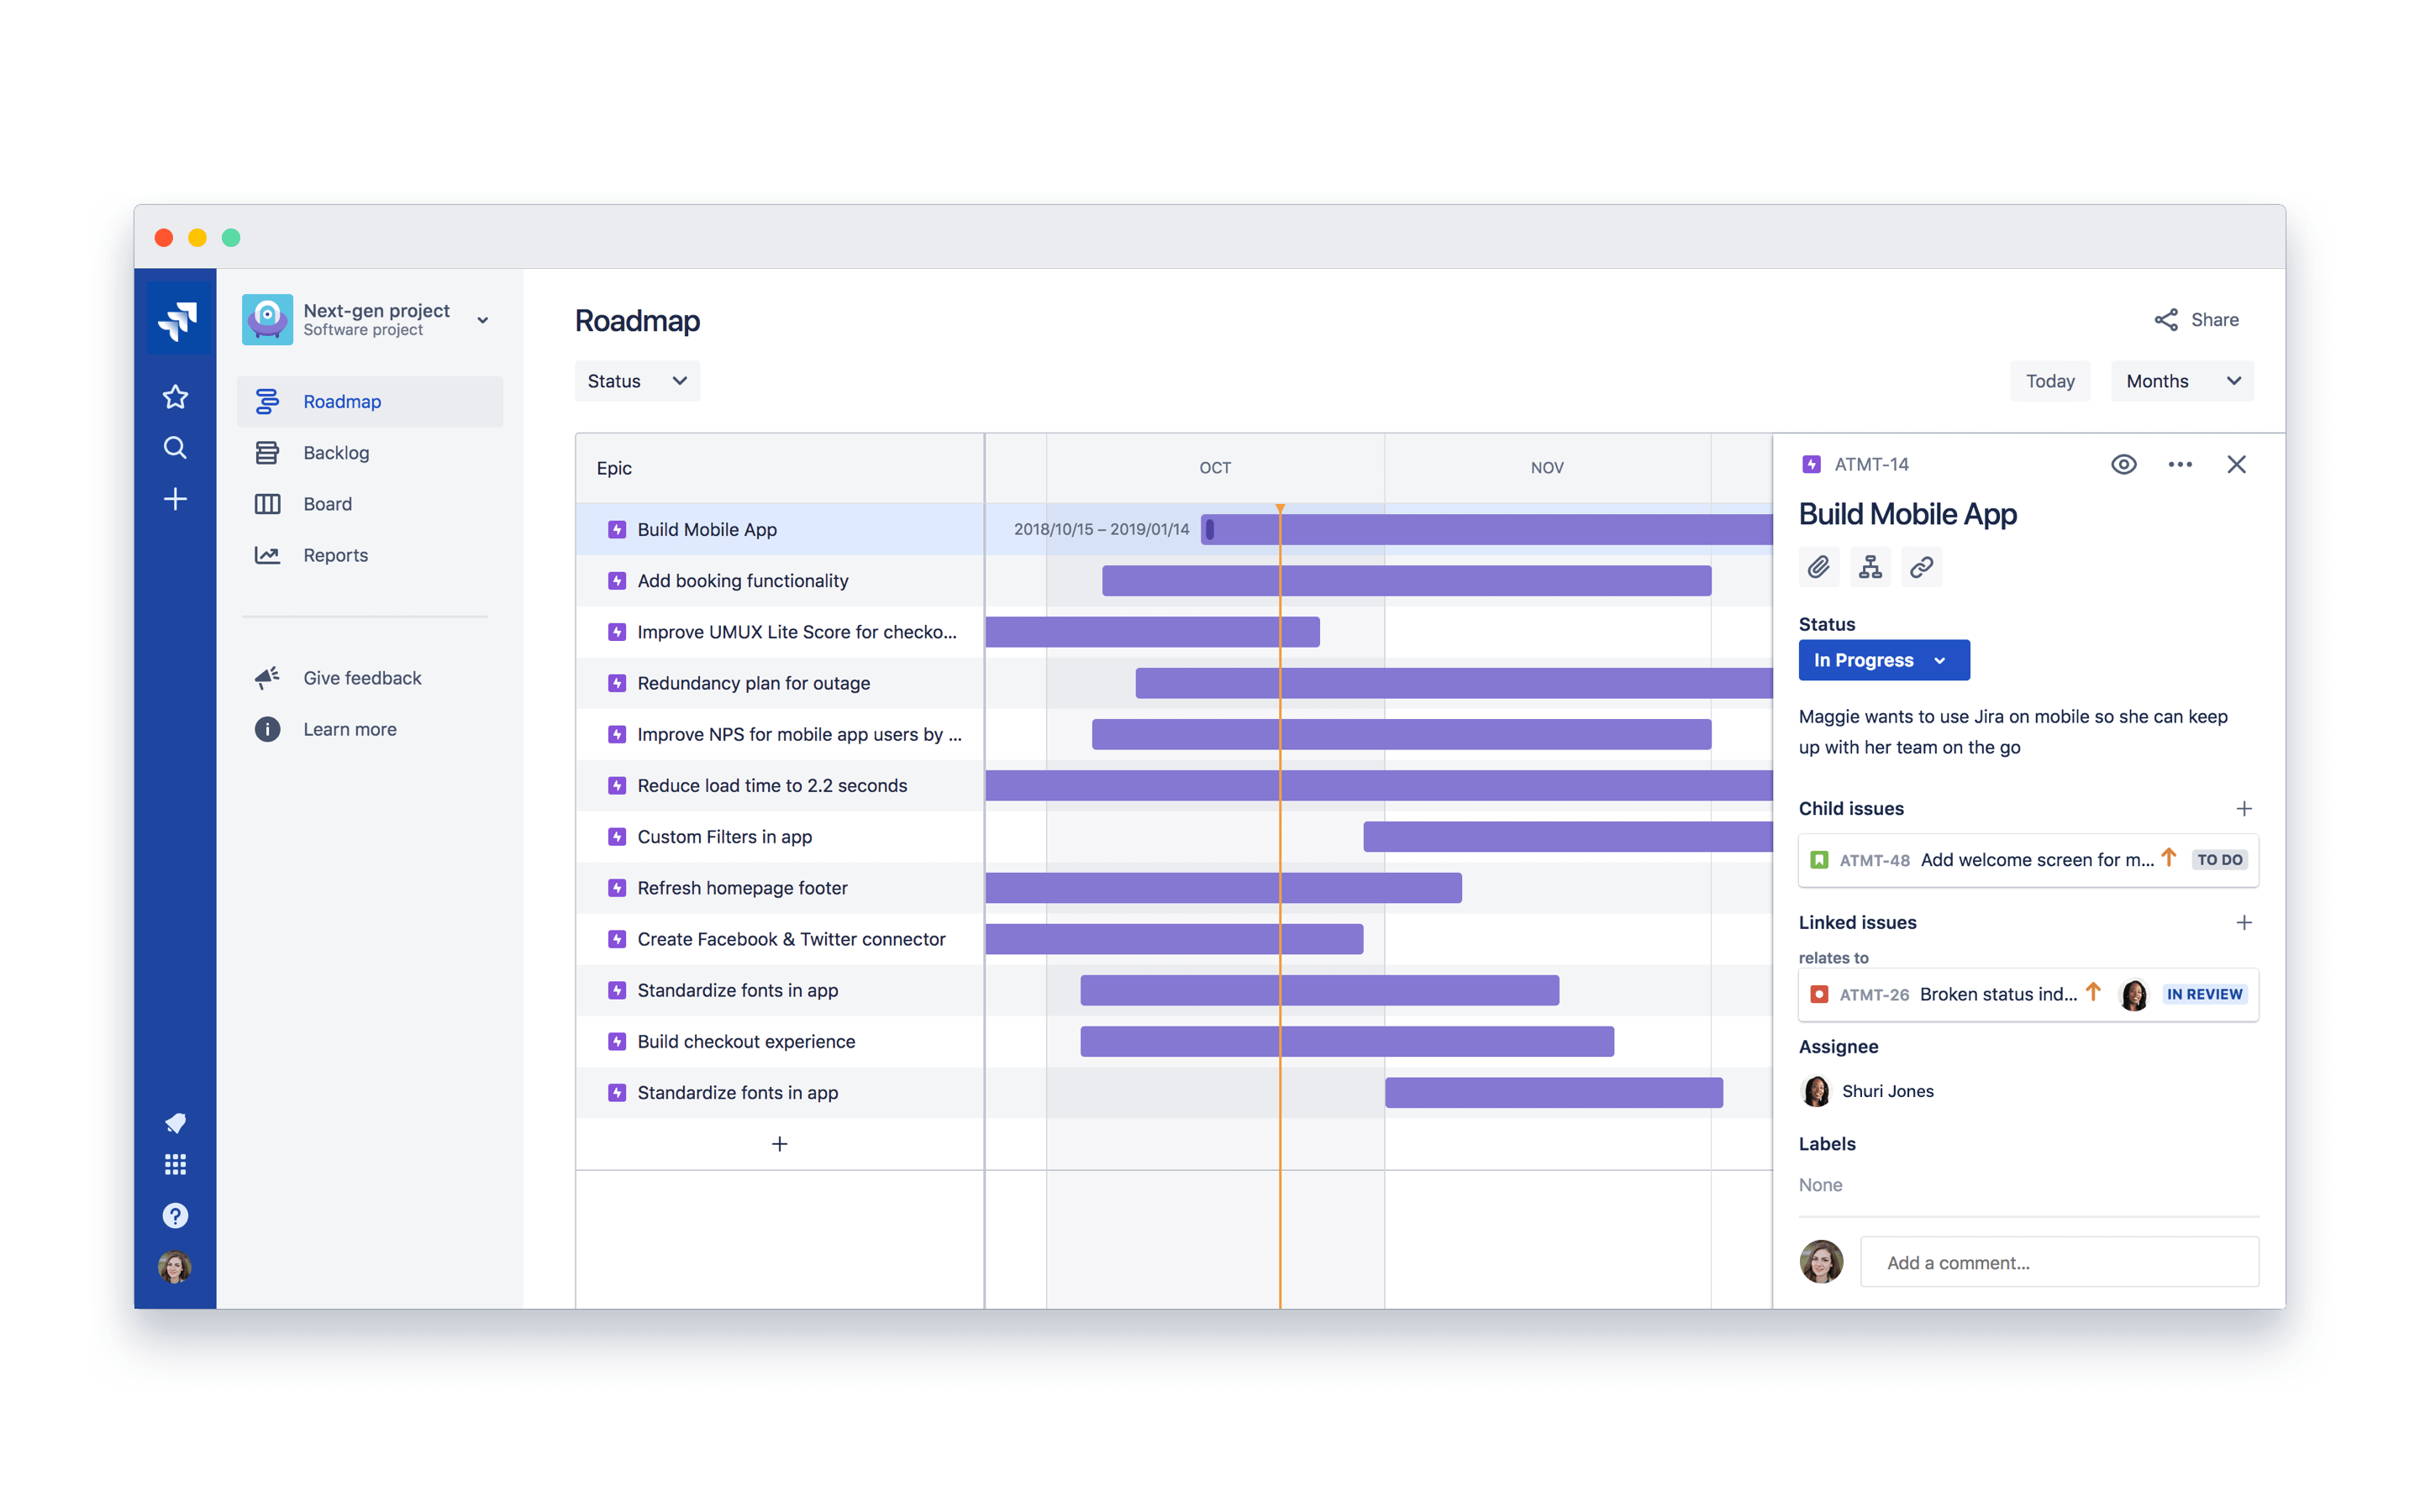 A product roadmap with detailed development tasks